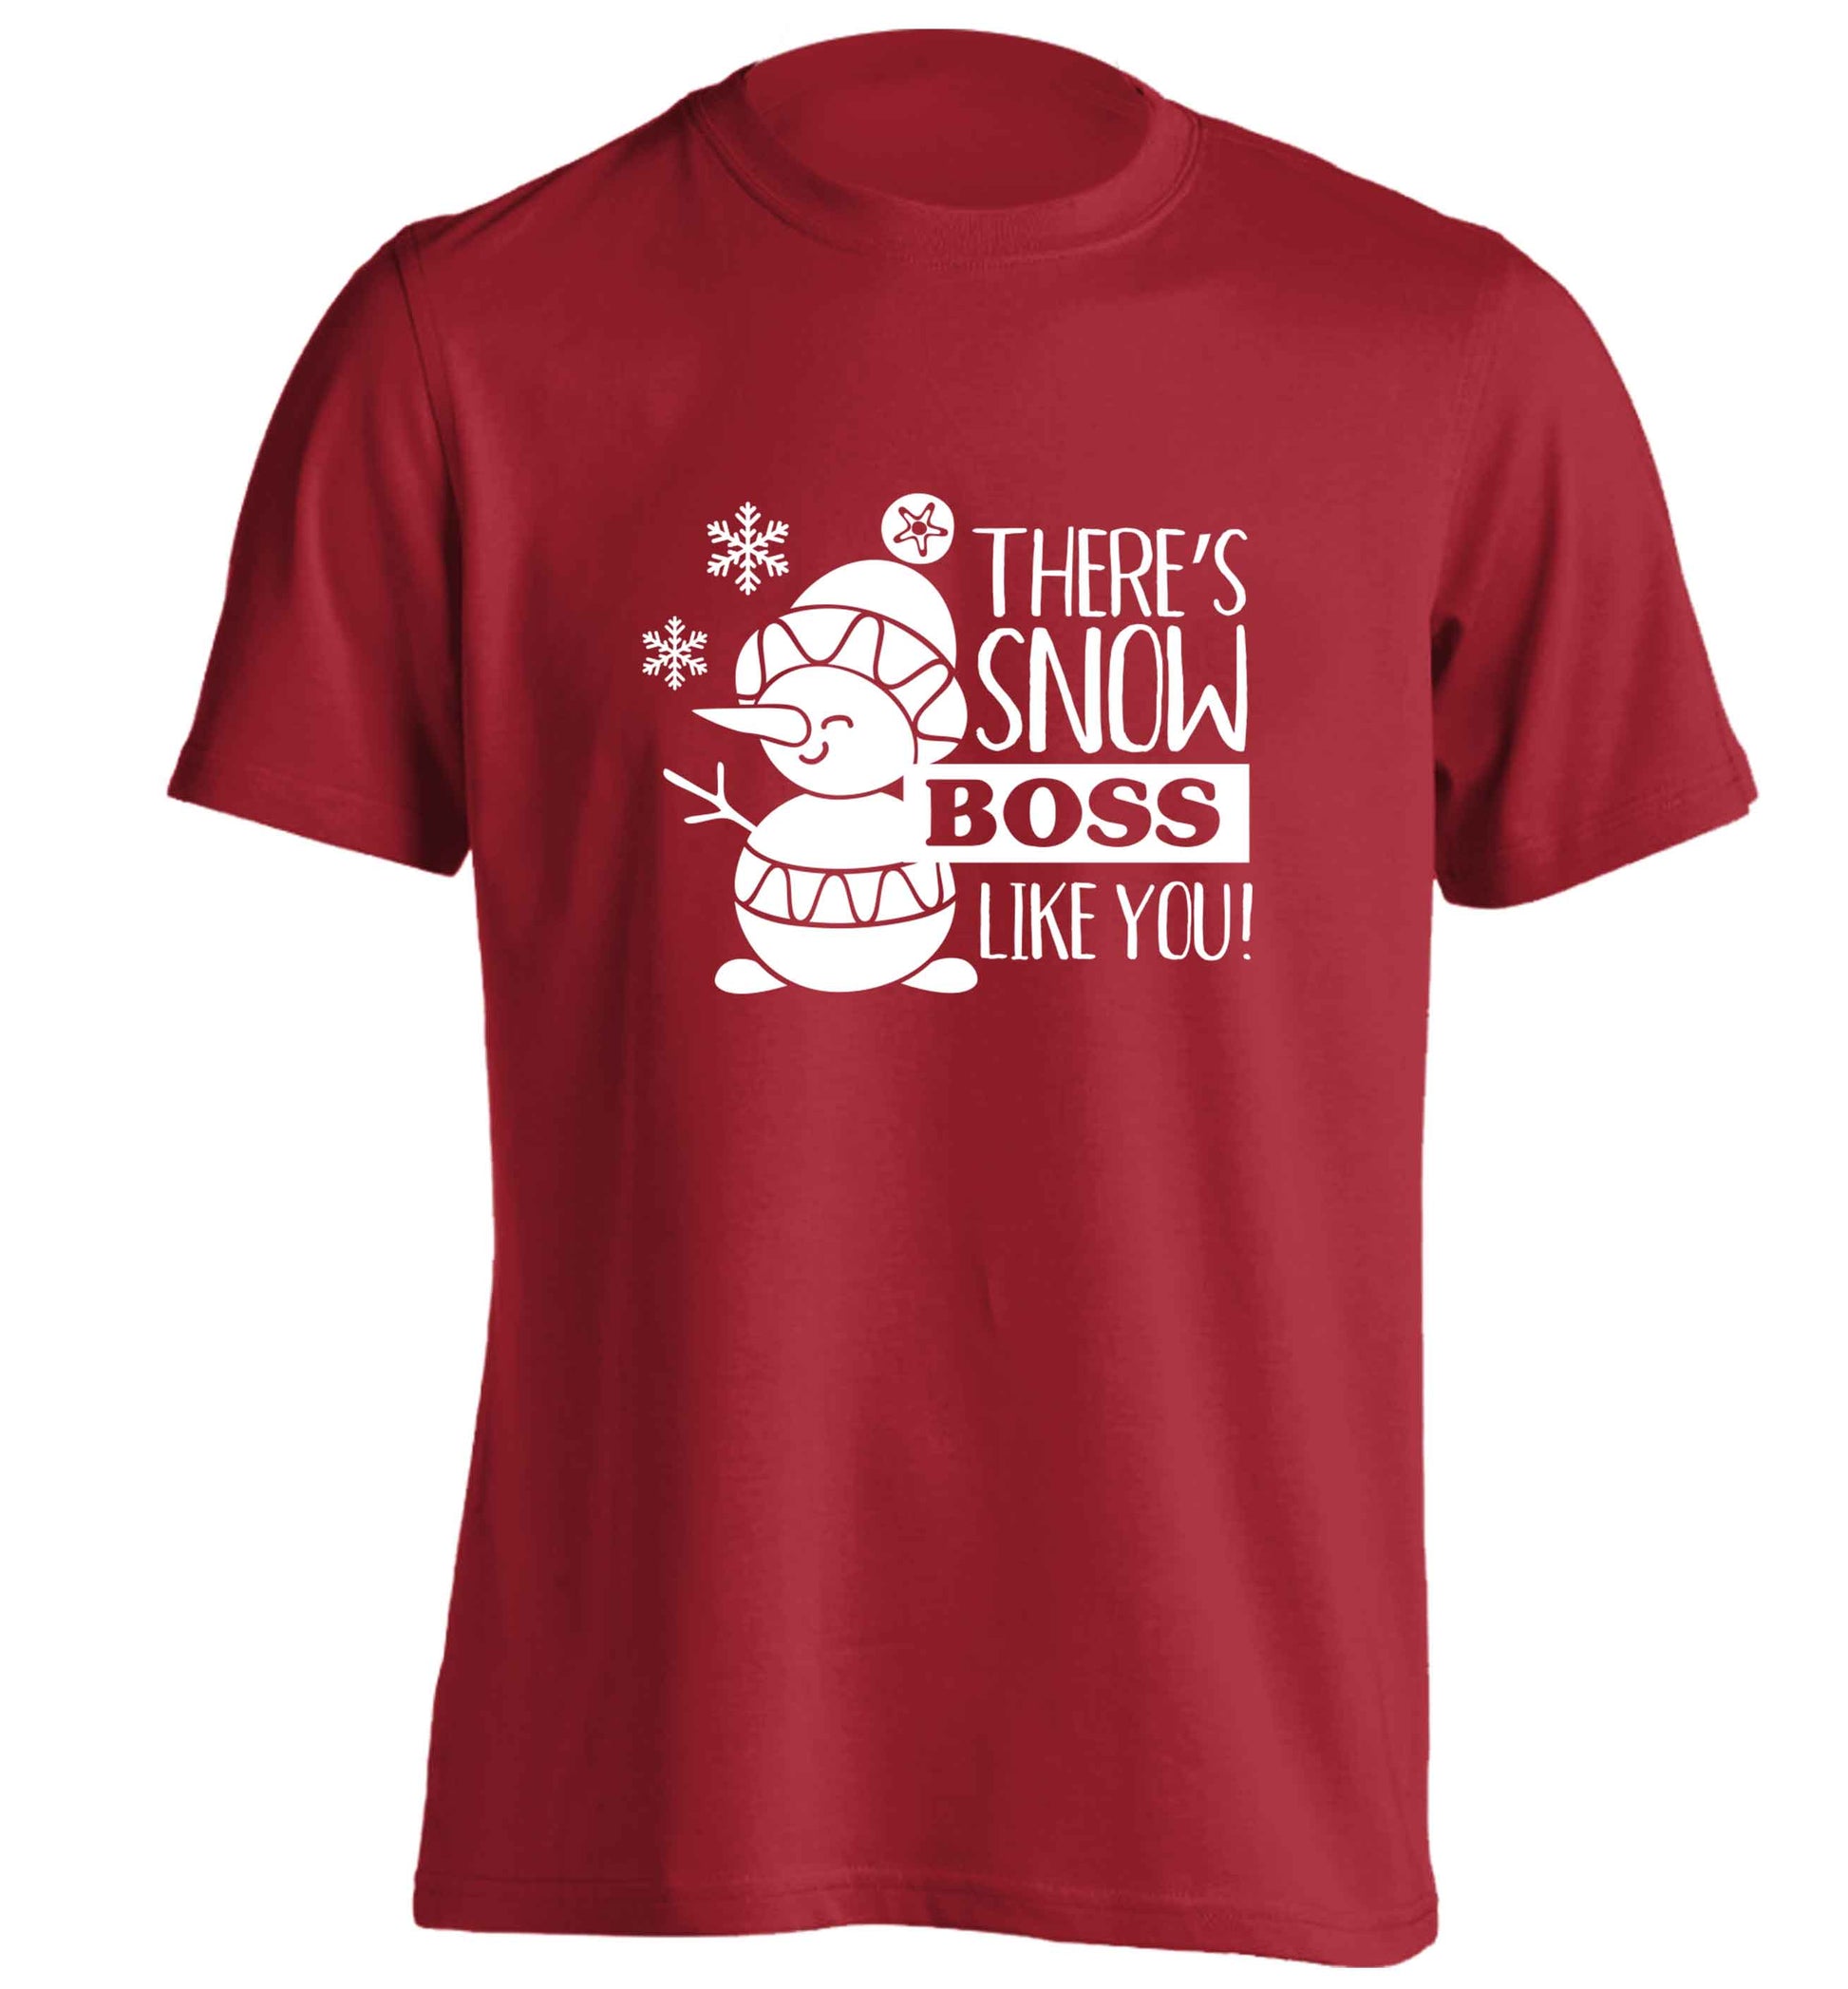 There's snow boss like you adults unisex red Tshirt 2XL